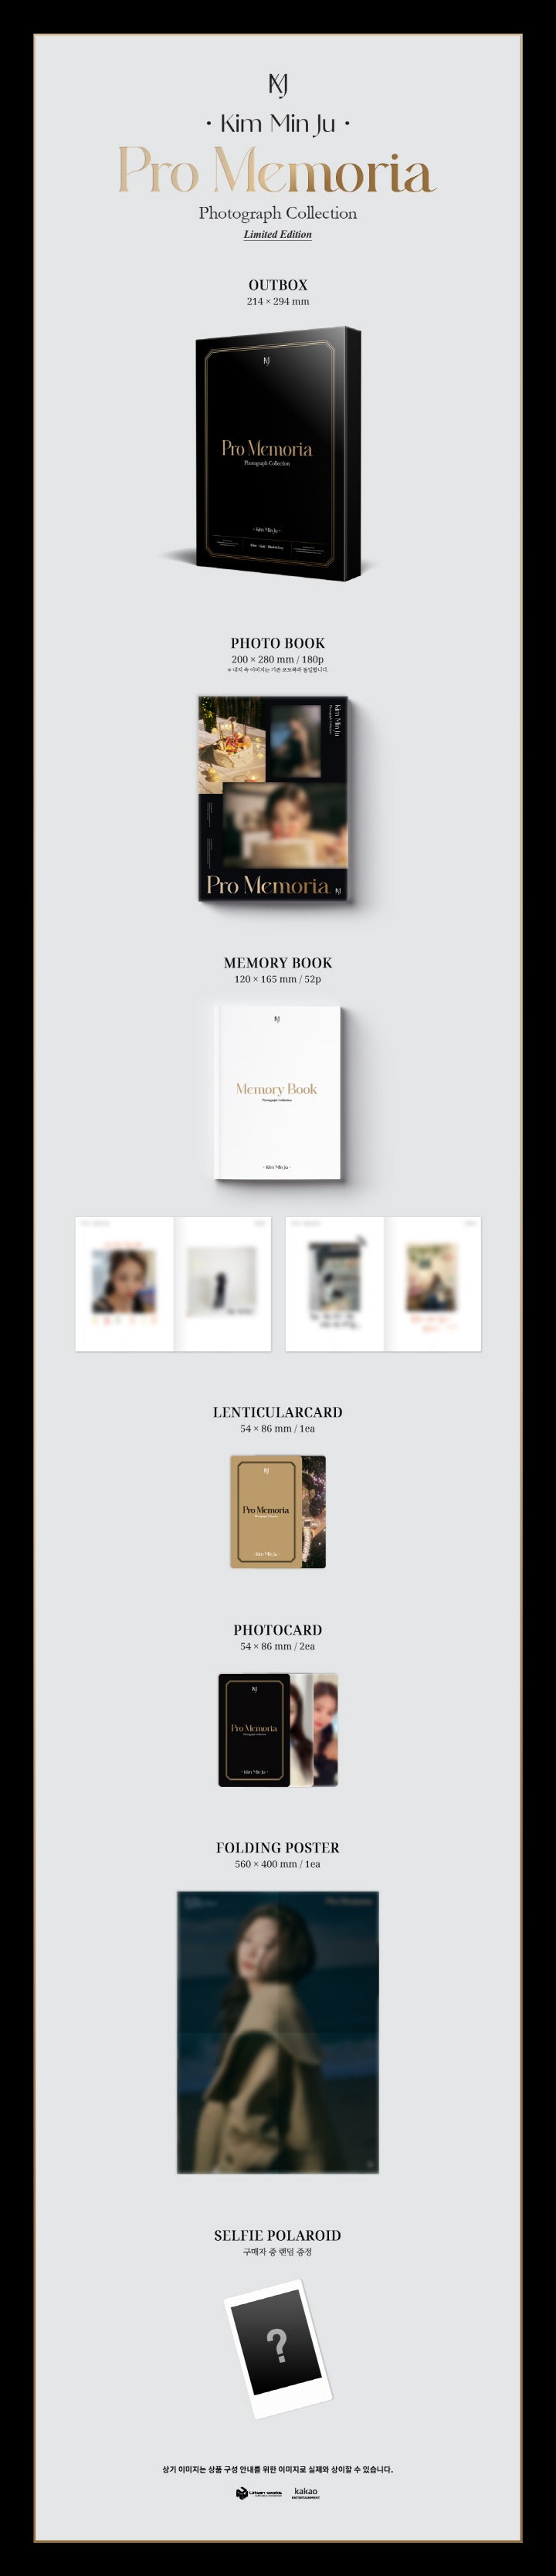 1 Photo Book (180 pages)
1 Memory Book (52 pages)
1 Lenticular Card
2 Photo Cards
1 Folding Poster
1 Selfie Polaroid (rand...